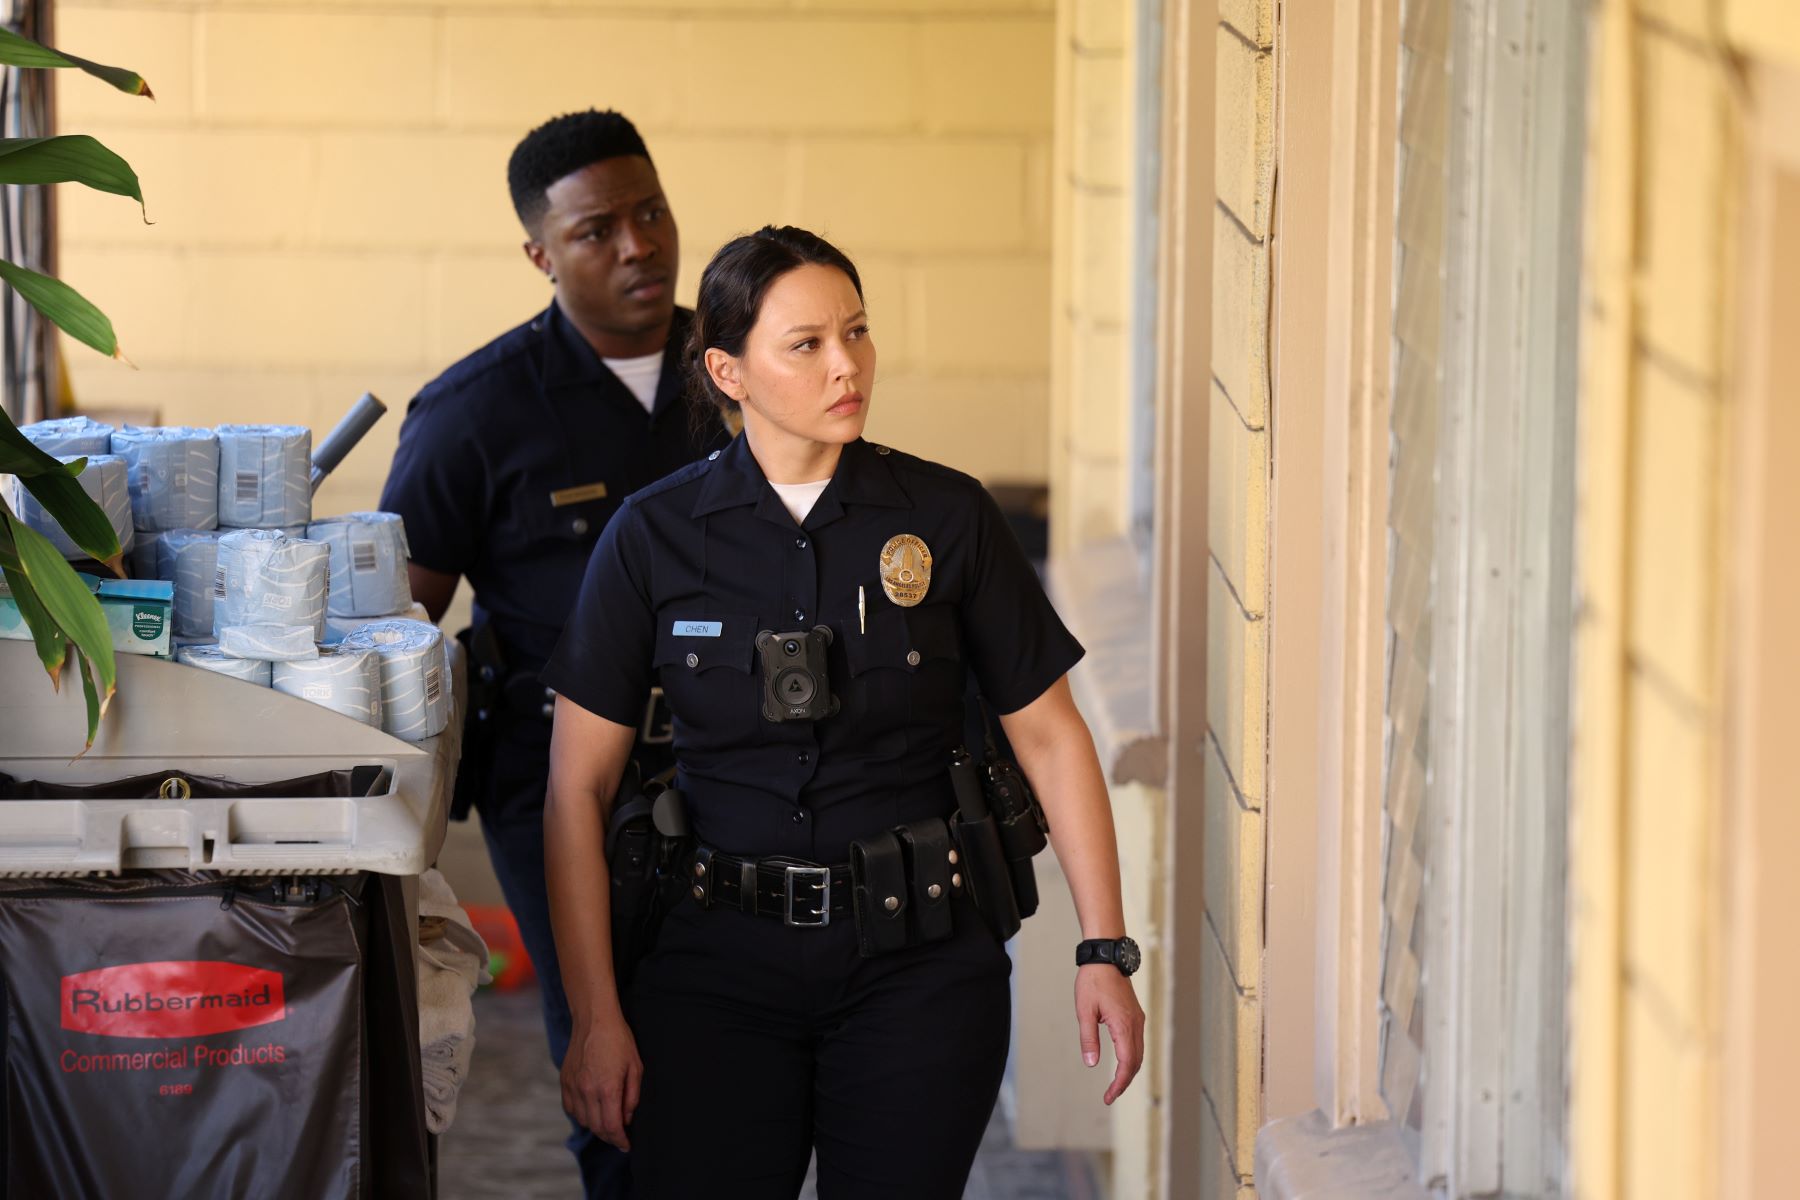 Tru Valentino and Melissa O'Neil, who star in 'The Rookie' Season 5 Episode 8 on ABC, share a scene as Aaron Thorsen and Lucy Chen, and they both are wearing their dark blue police uniforms.